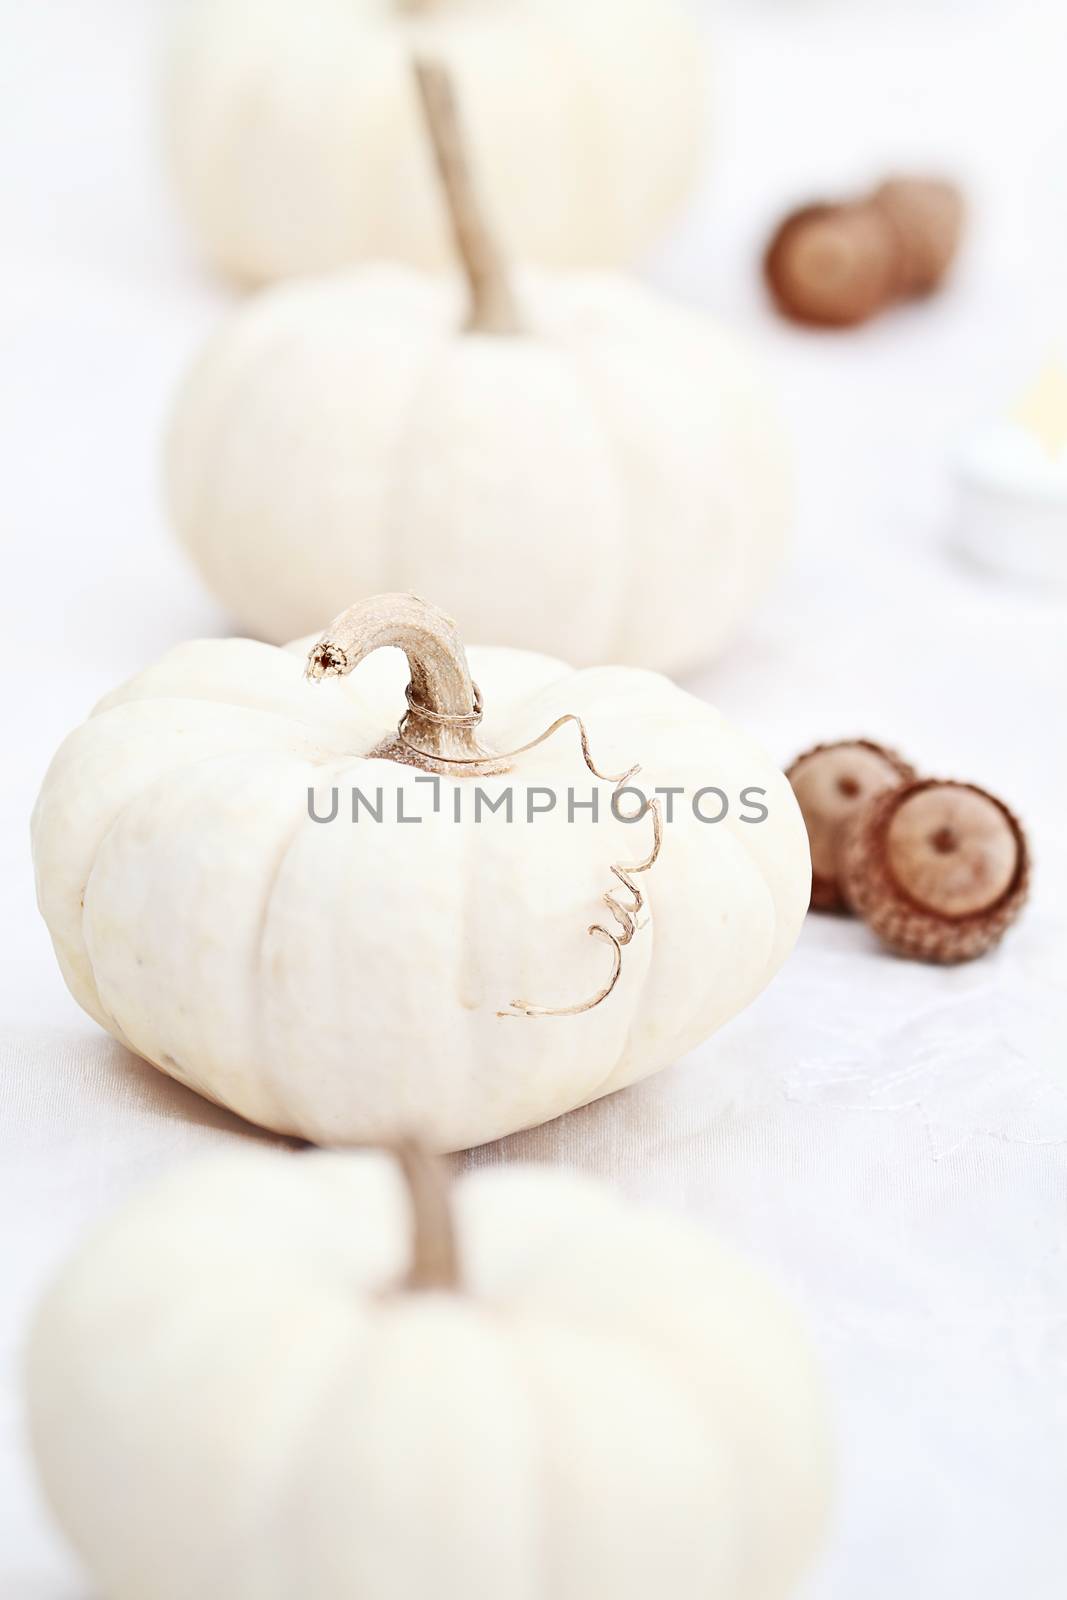 Beautiful table decorations of white pumpkins and acorns. Extreme shallow depth of field with selective focus on pumpkin with tendril.